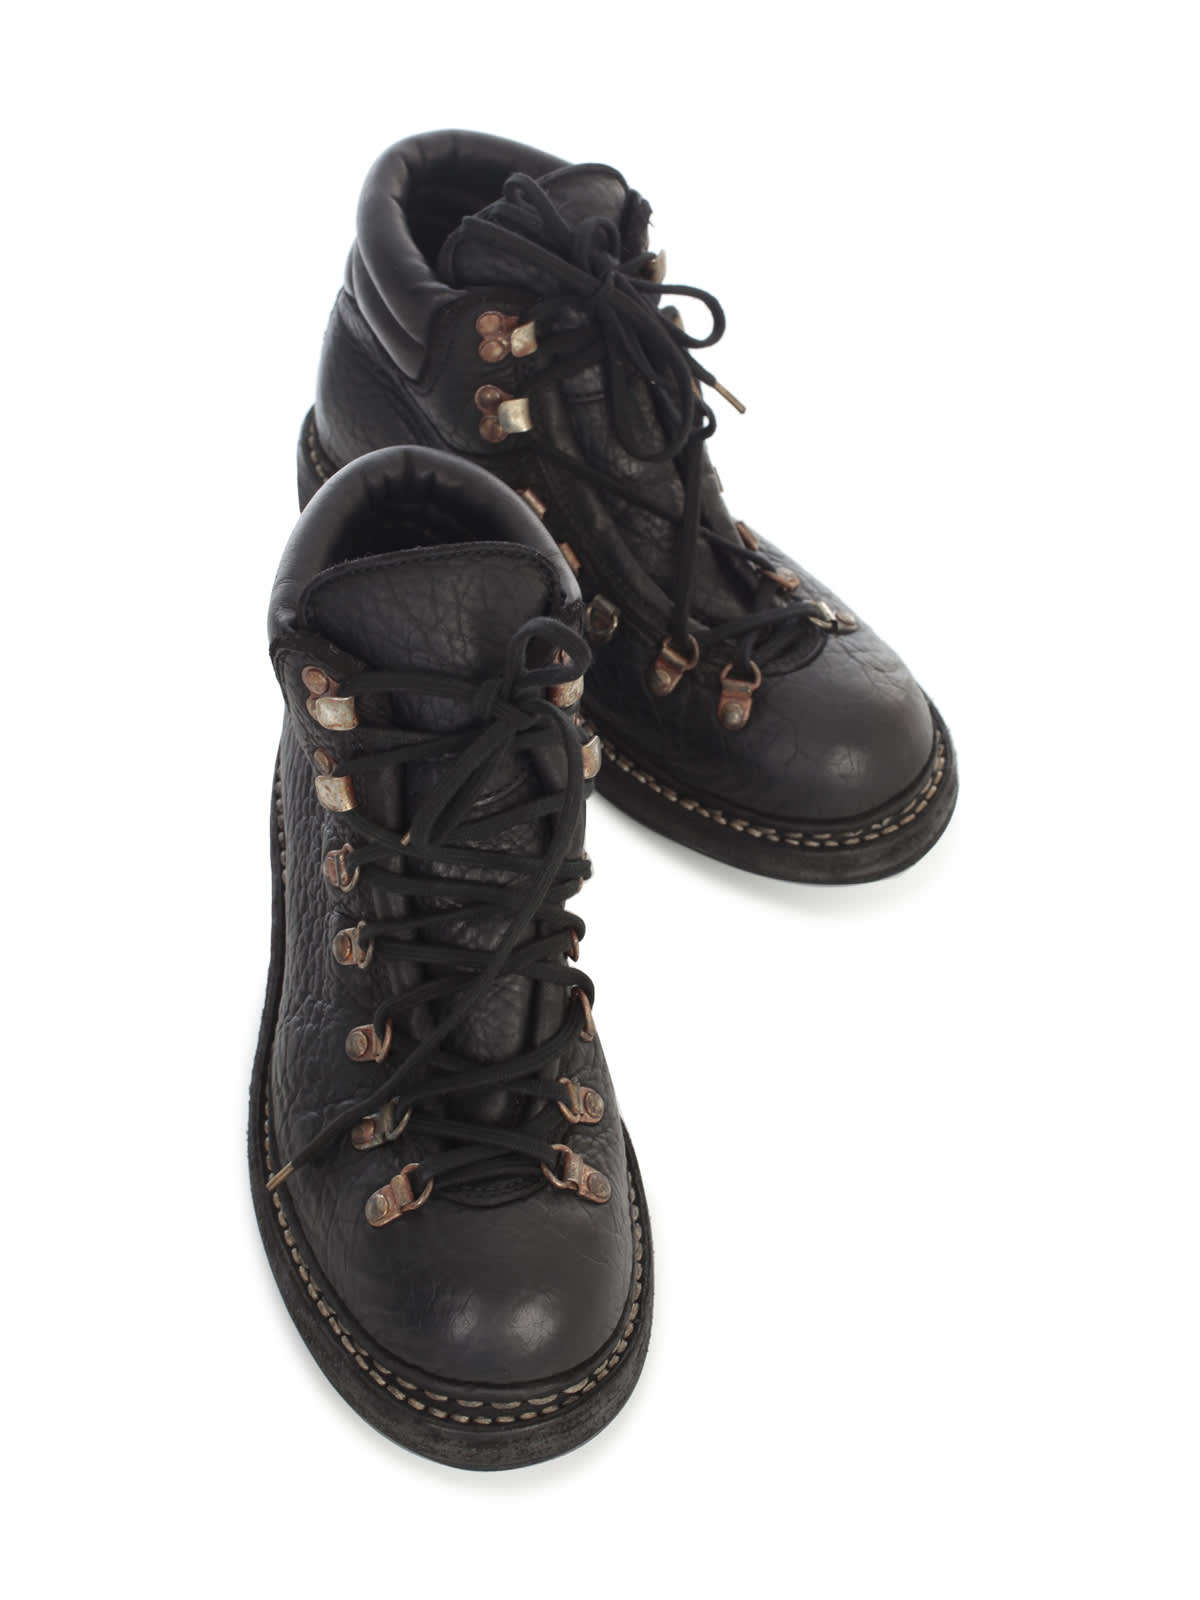 Guidi Boots | italist, ALWAYS LIKE A SALE